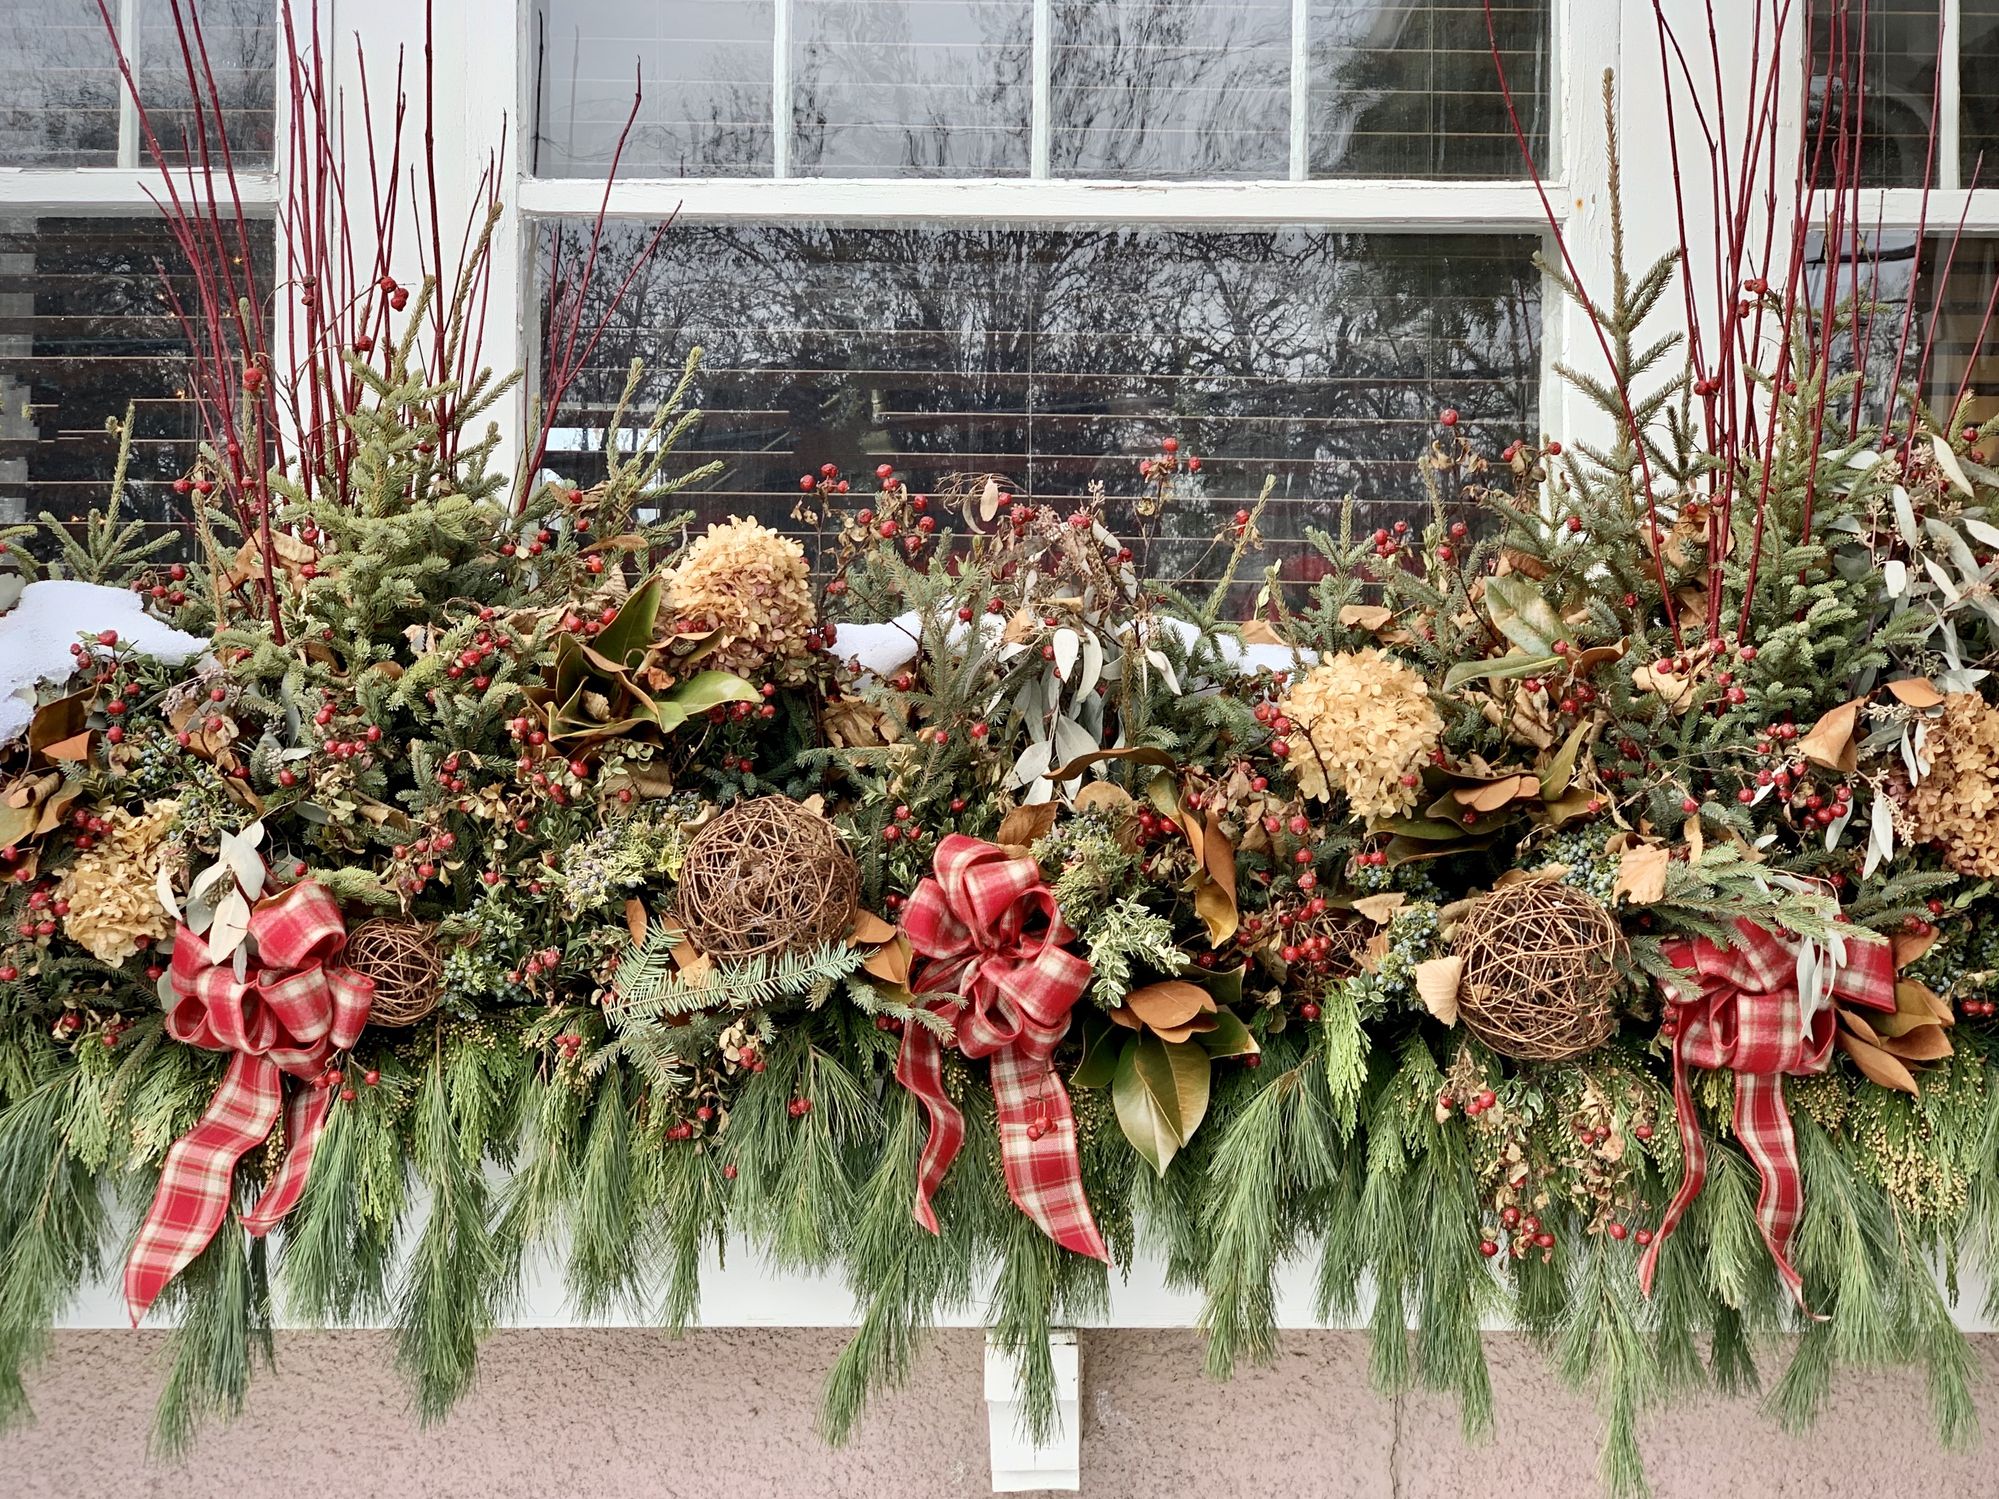 7 Christmas Planter Ideas and Tips to Decorate Holiday Containers